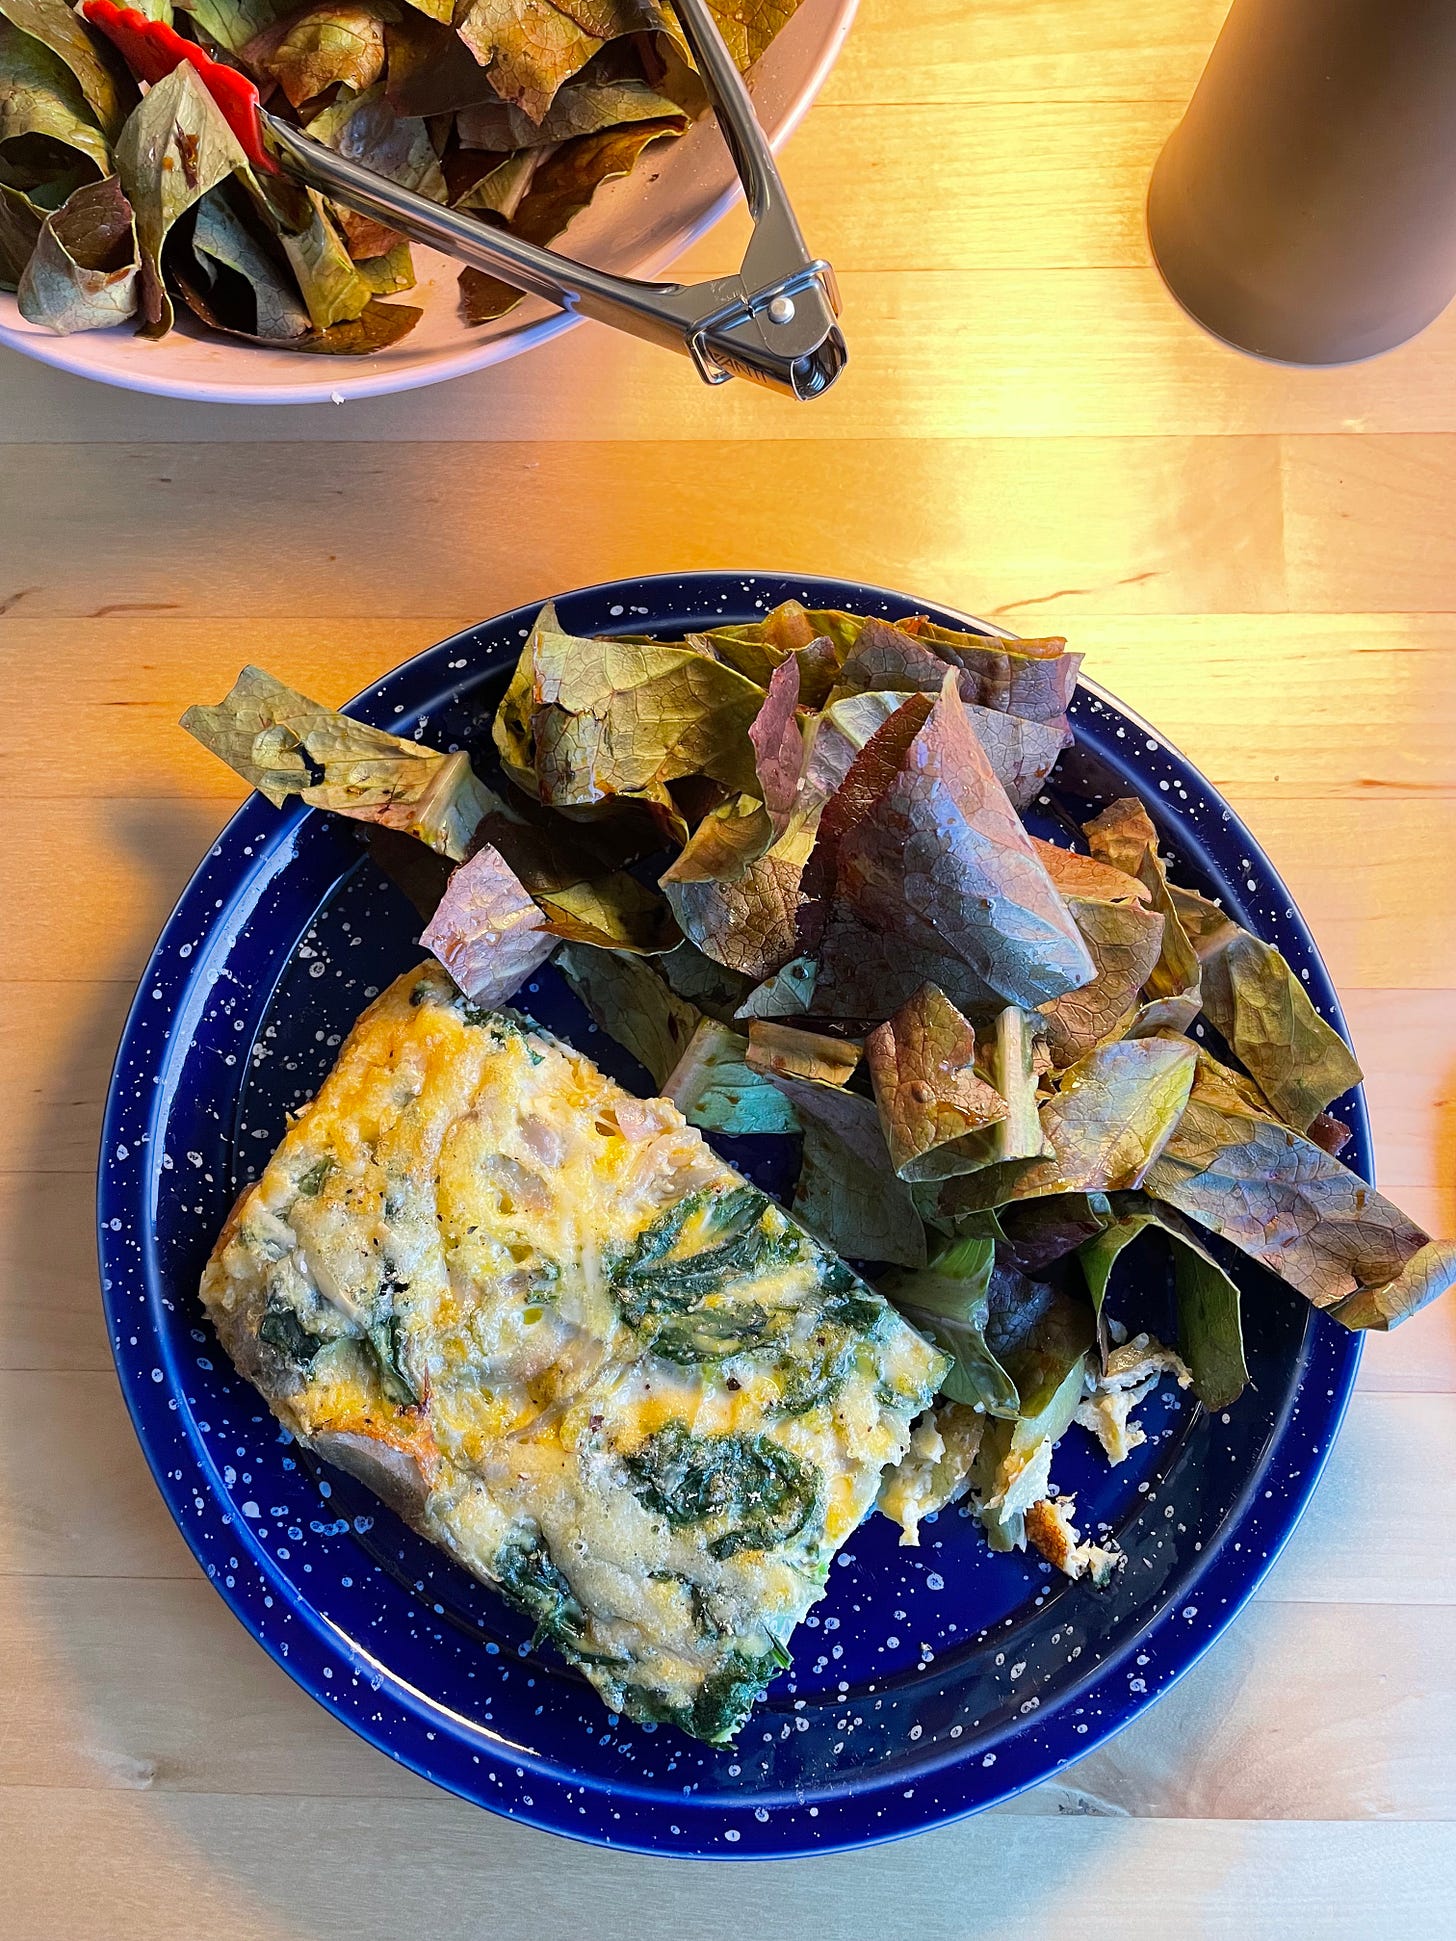 Slab of frittata made with spinach and cheese on a blue speckled plate, a dark leaf salad alongside it.